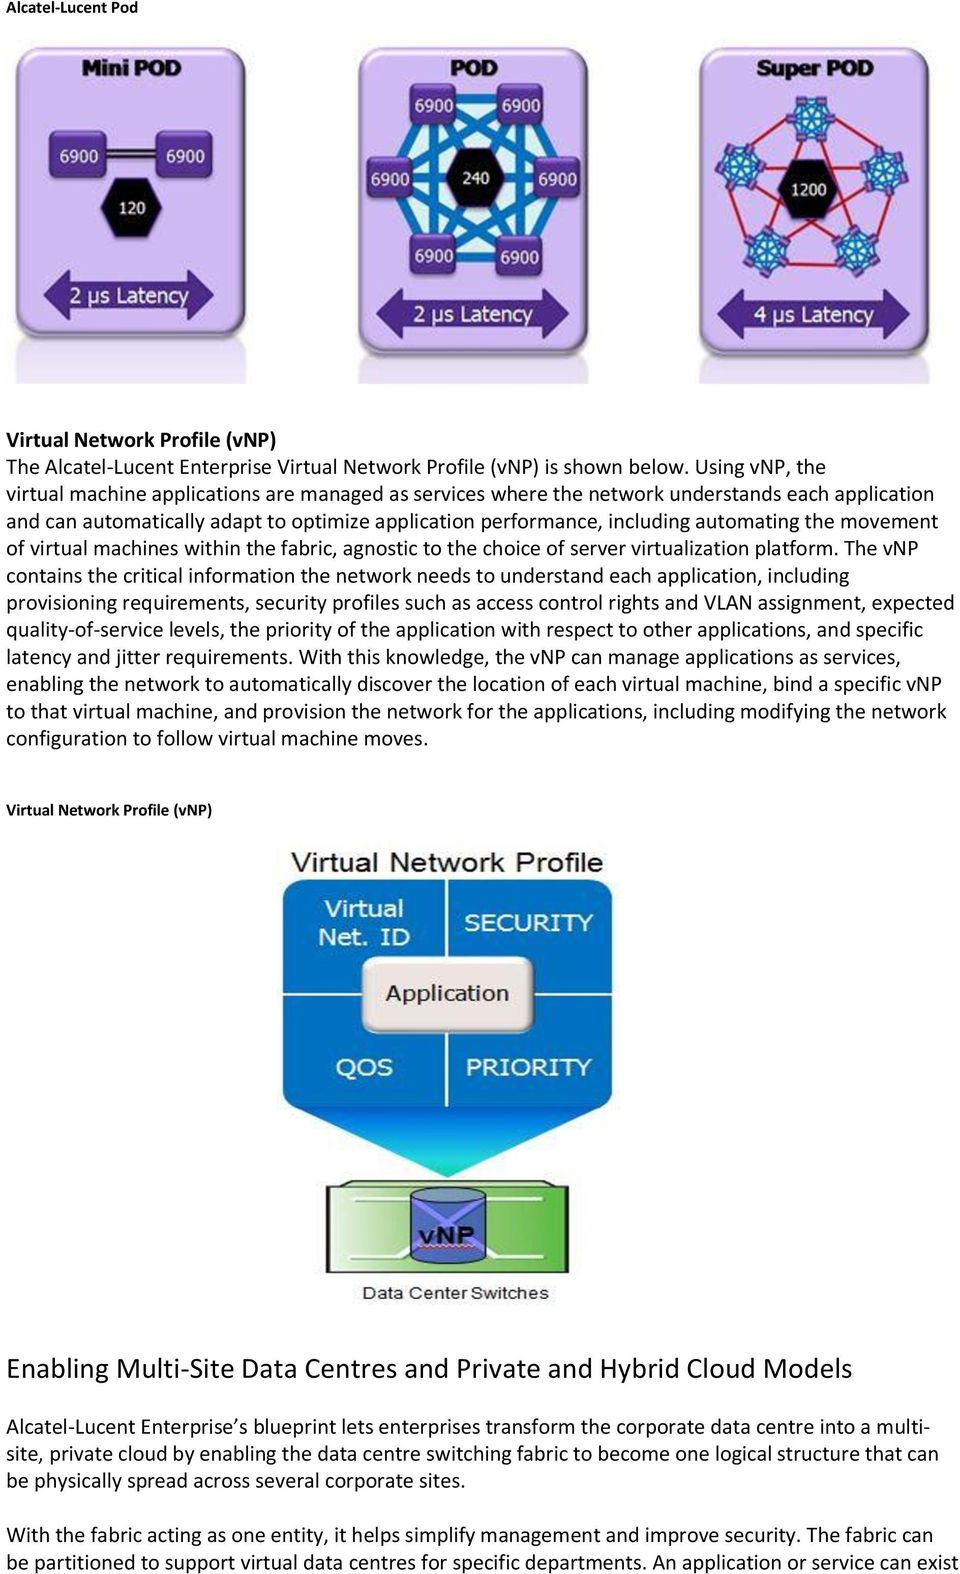 automating the movement of virtual machines within the fabric, agnostic to the choice of server virtualization platform.